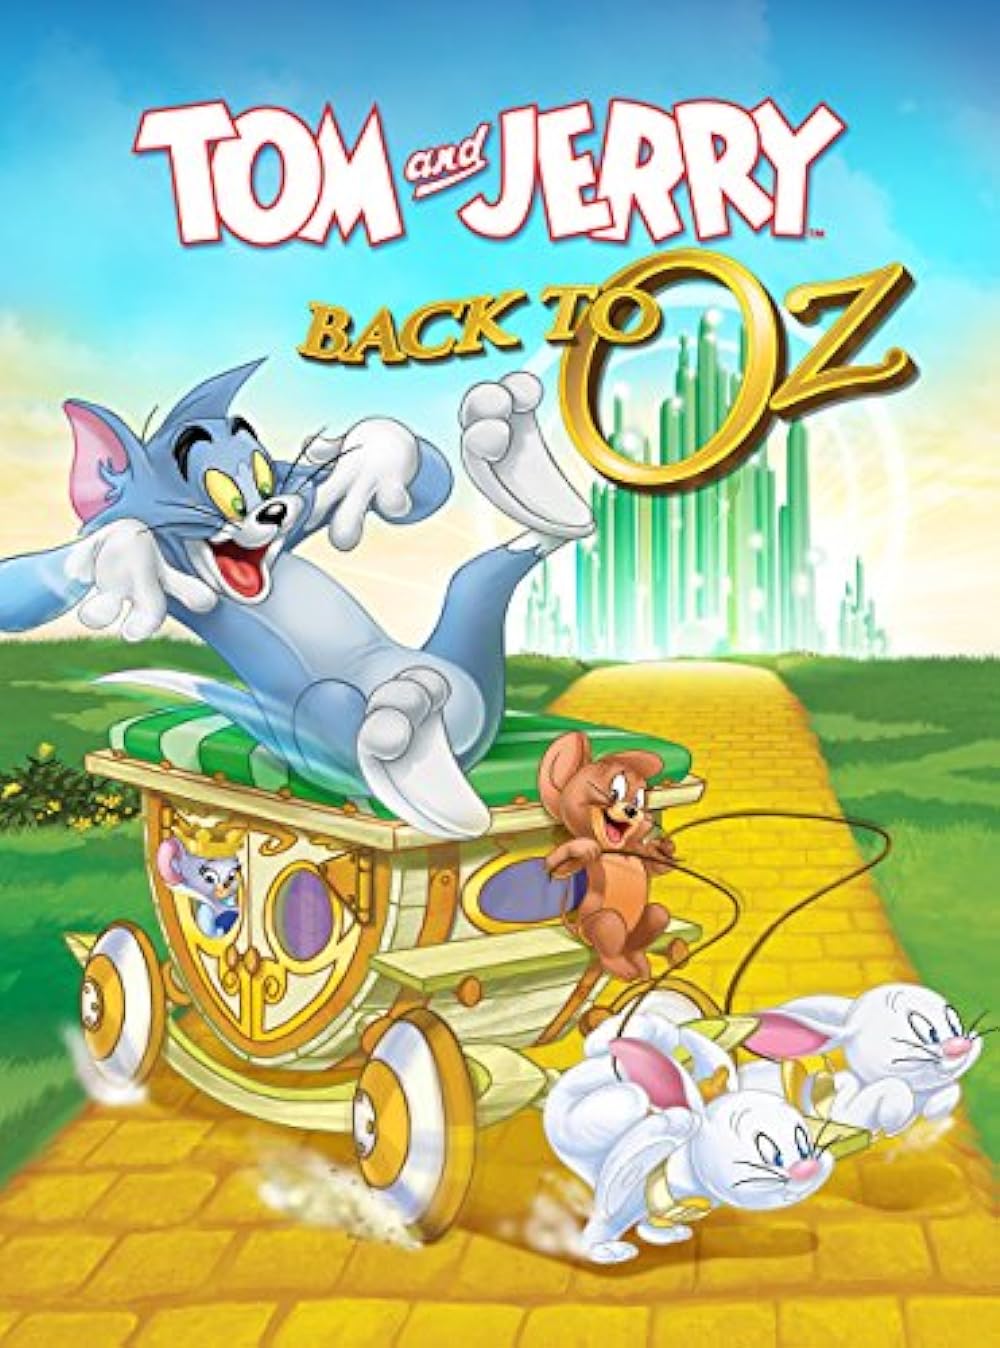 Best of Tom and jerry naked